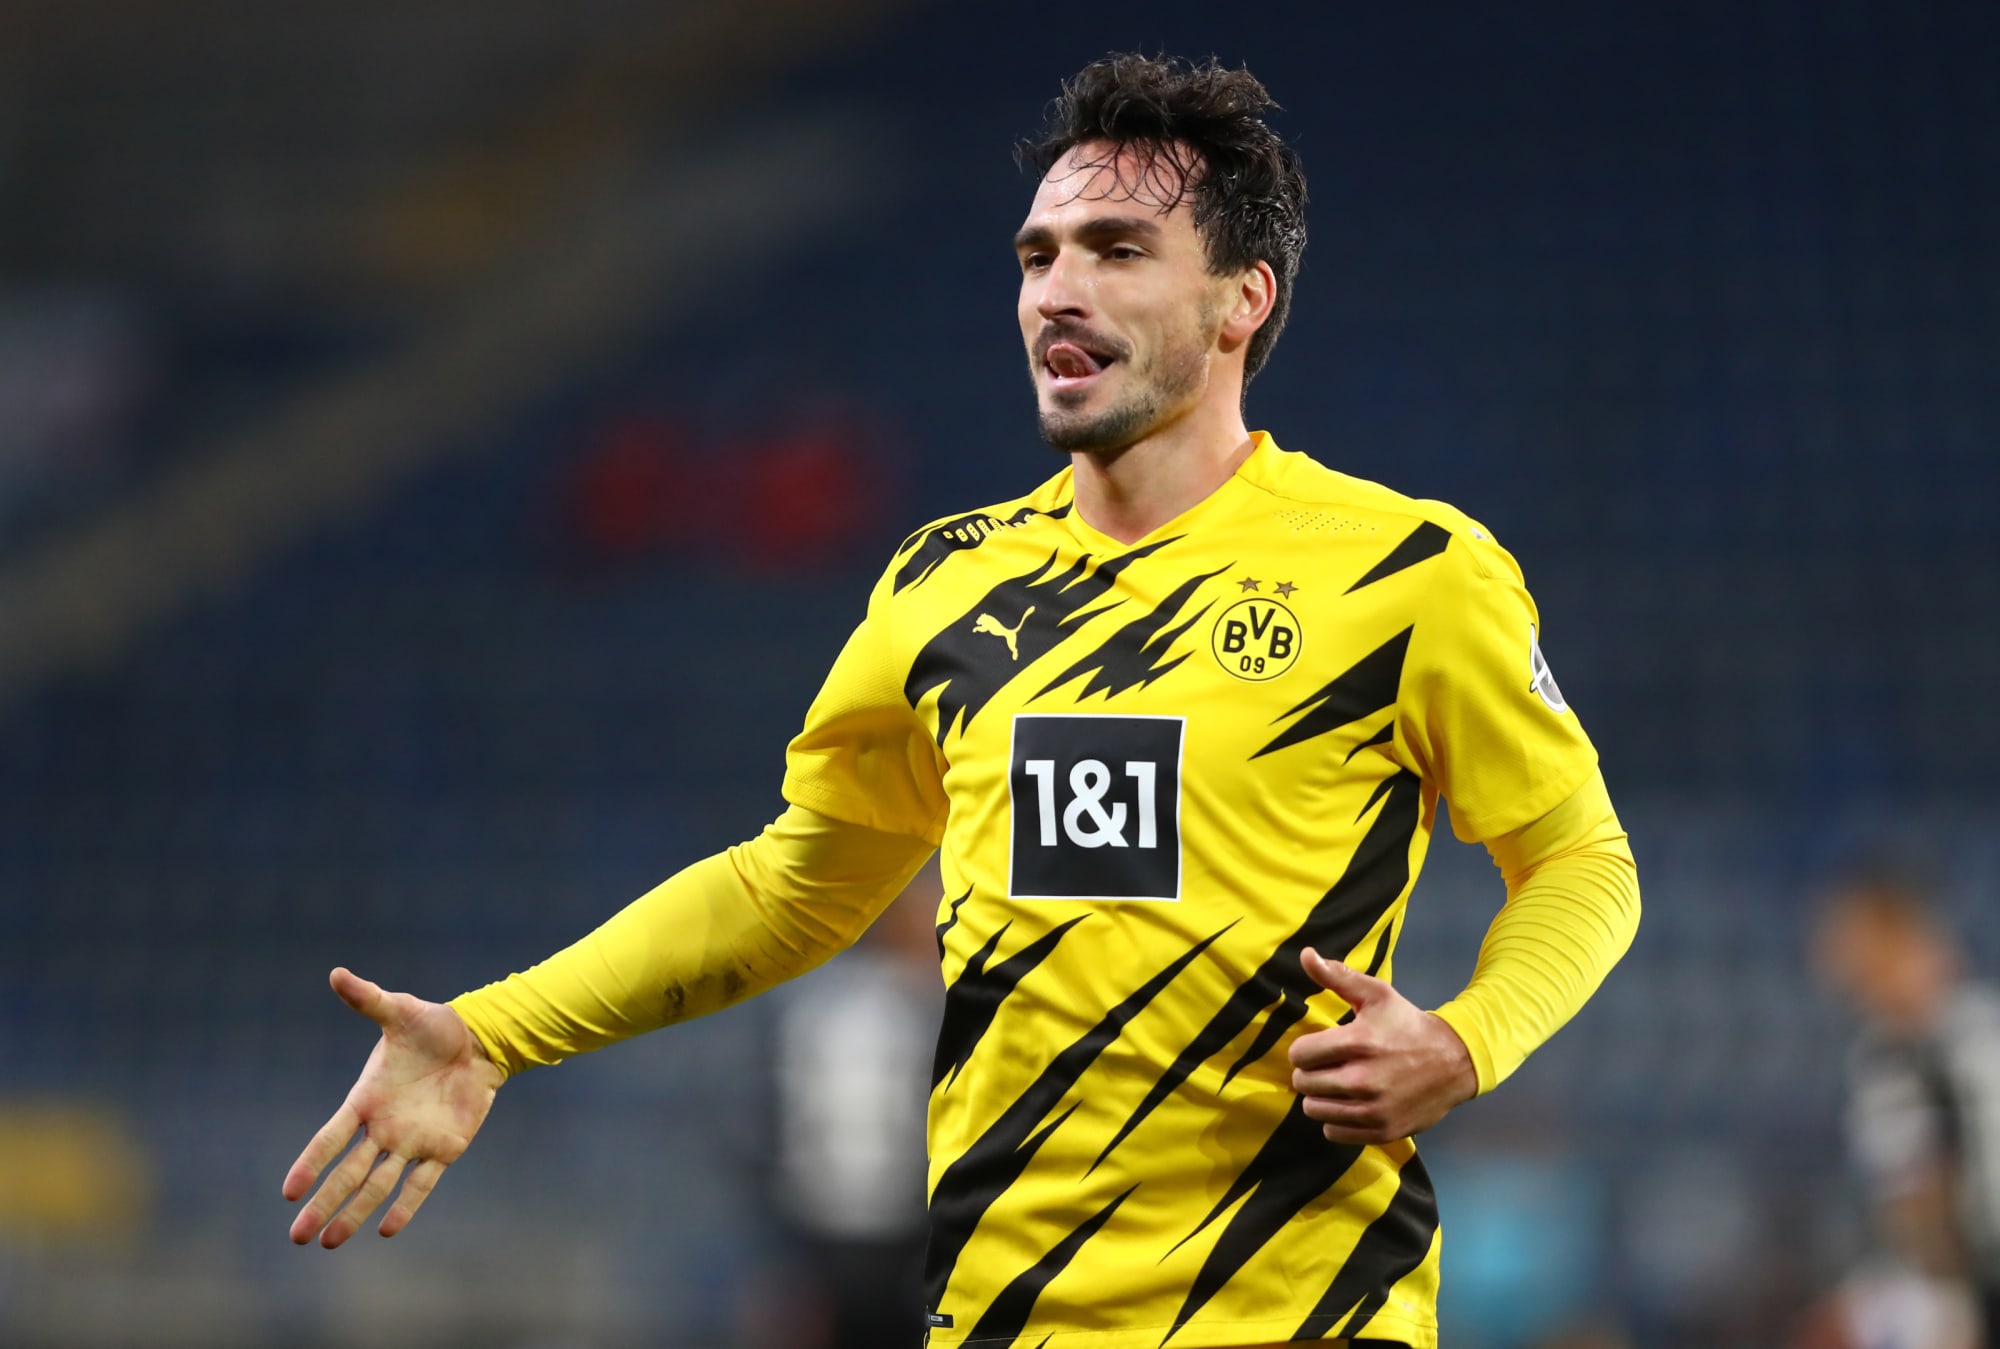 Mats Hummels to get one year extension if he plays 22 games next season